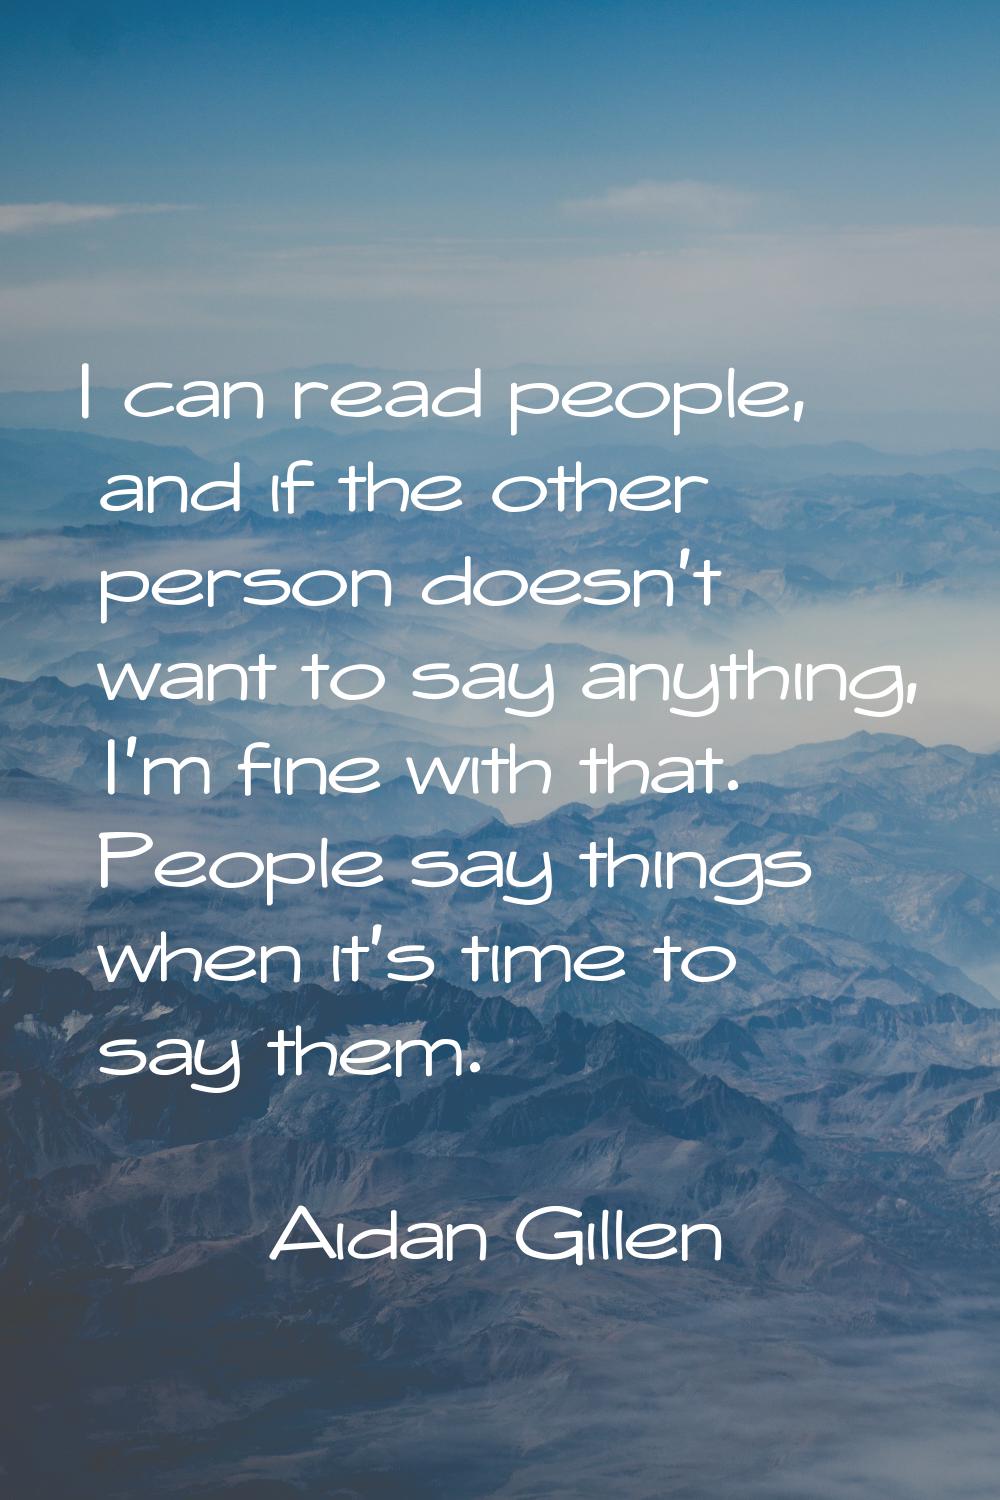 I can read people, and if the other person doesn't want to say anything, I'm fine with that. People